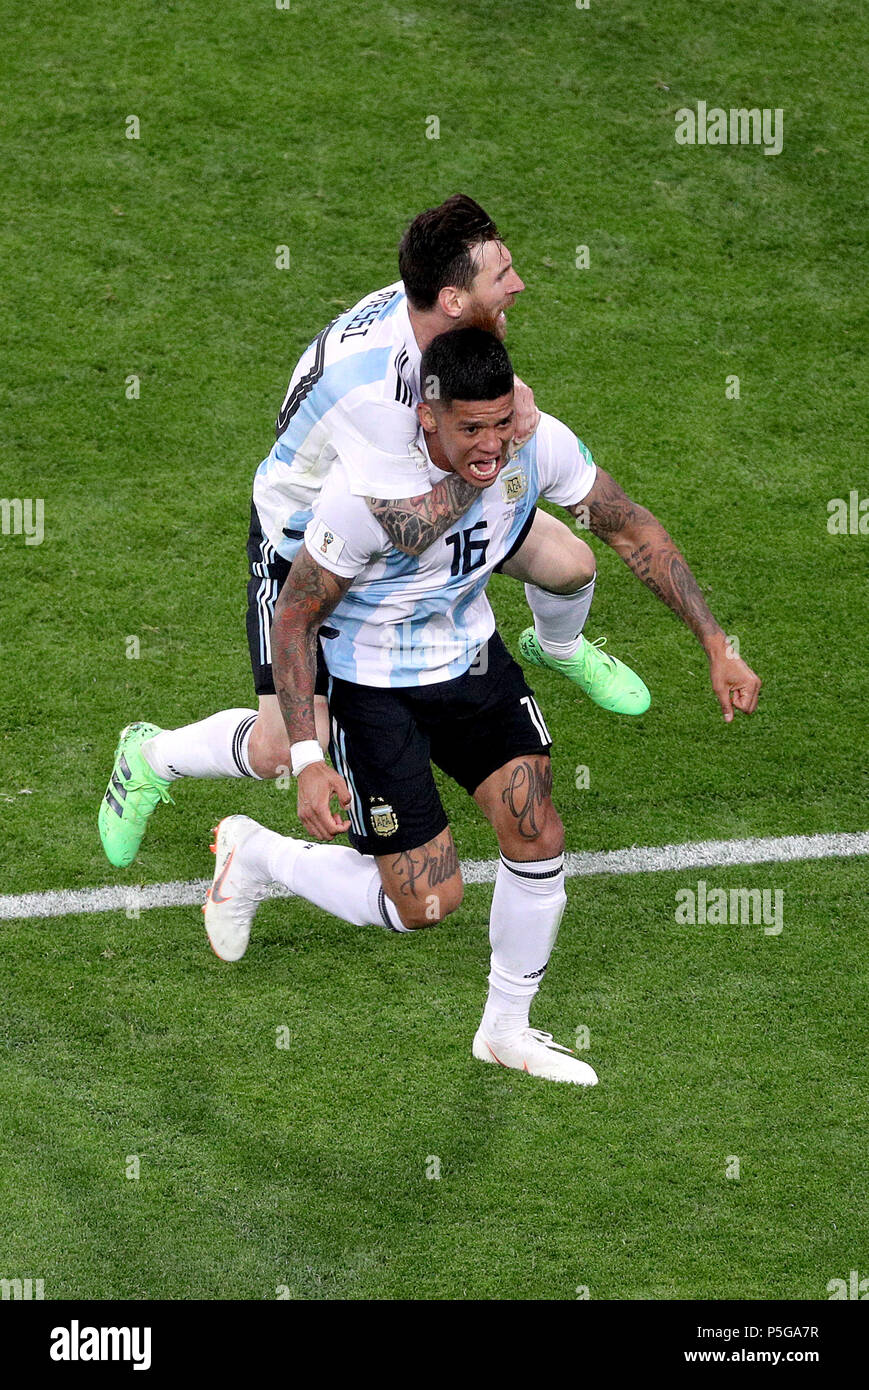 Argentina's Marcos Rojo (front) celebrates scoring his side's second goal of the game with team-mate Lionel Messi (back) during the FIFA World Cup Group D match at Saint Petersburg Stadium. Stock Photo